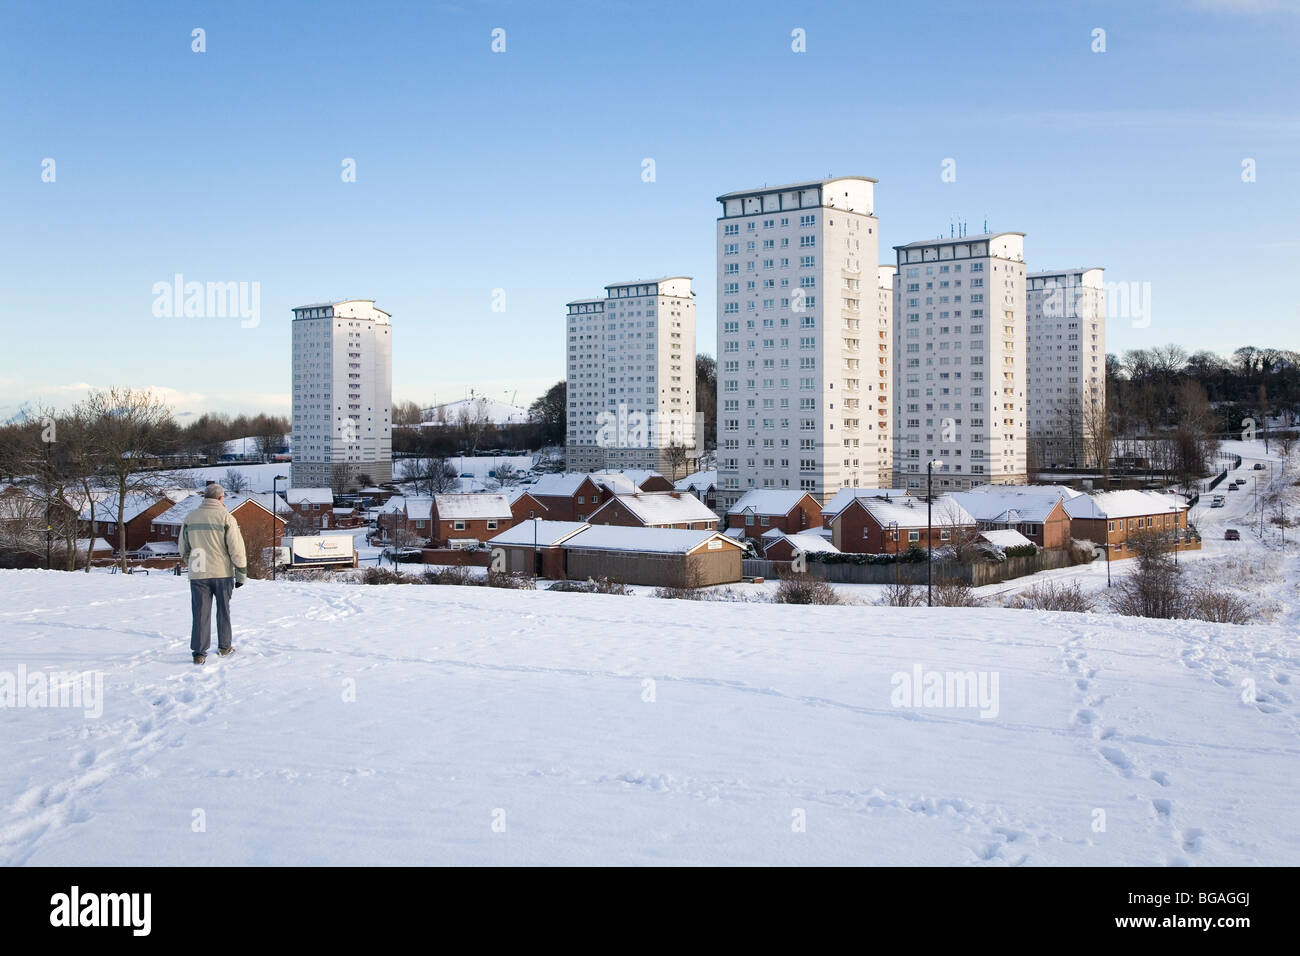 A man walks through snow in Sunderland, England. The high-rise Gilley Law housing estate can be seen in the background. Stock Photo